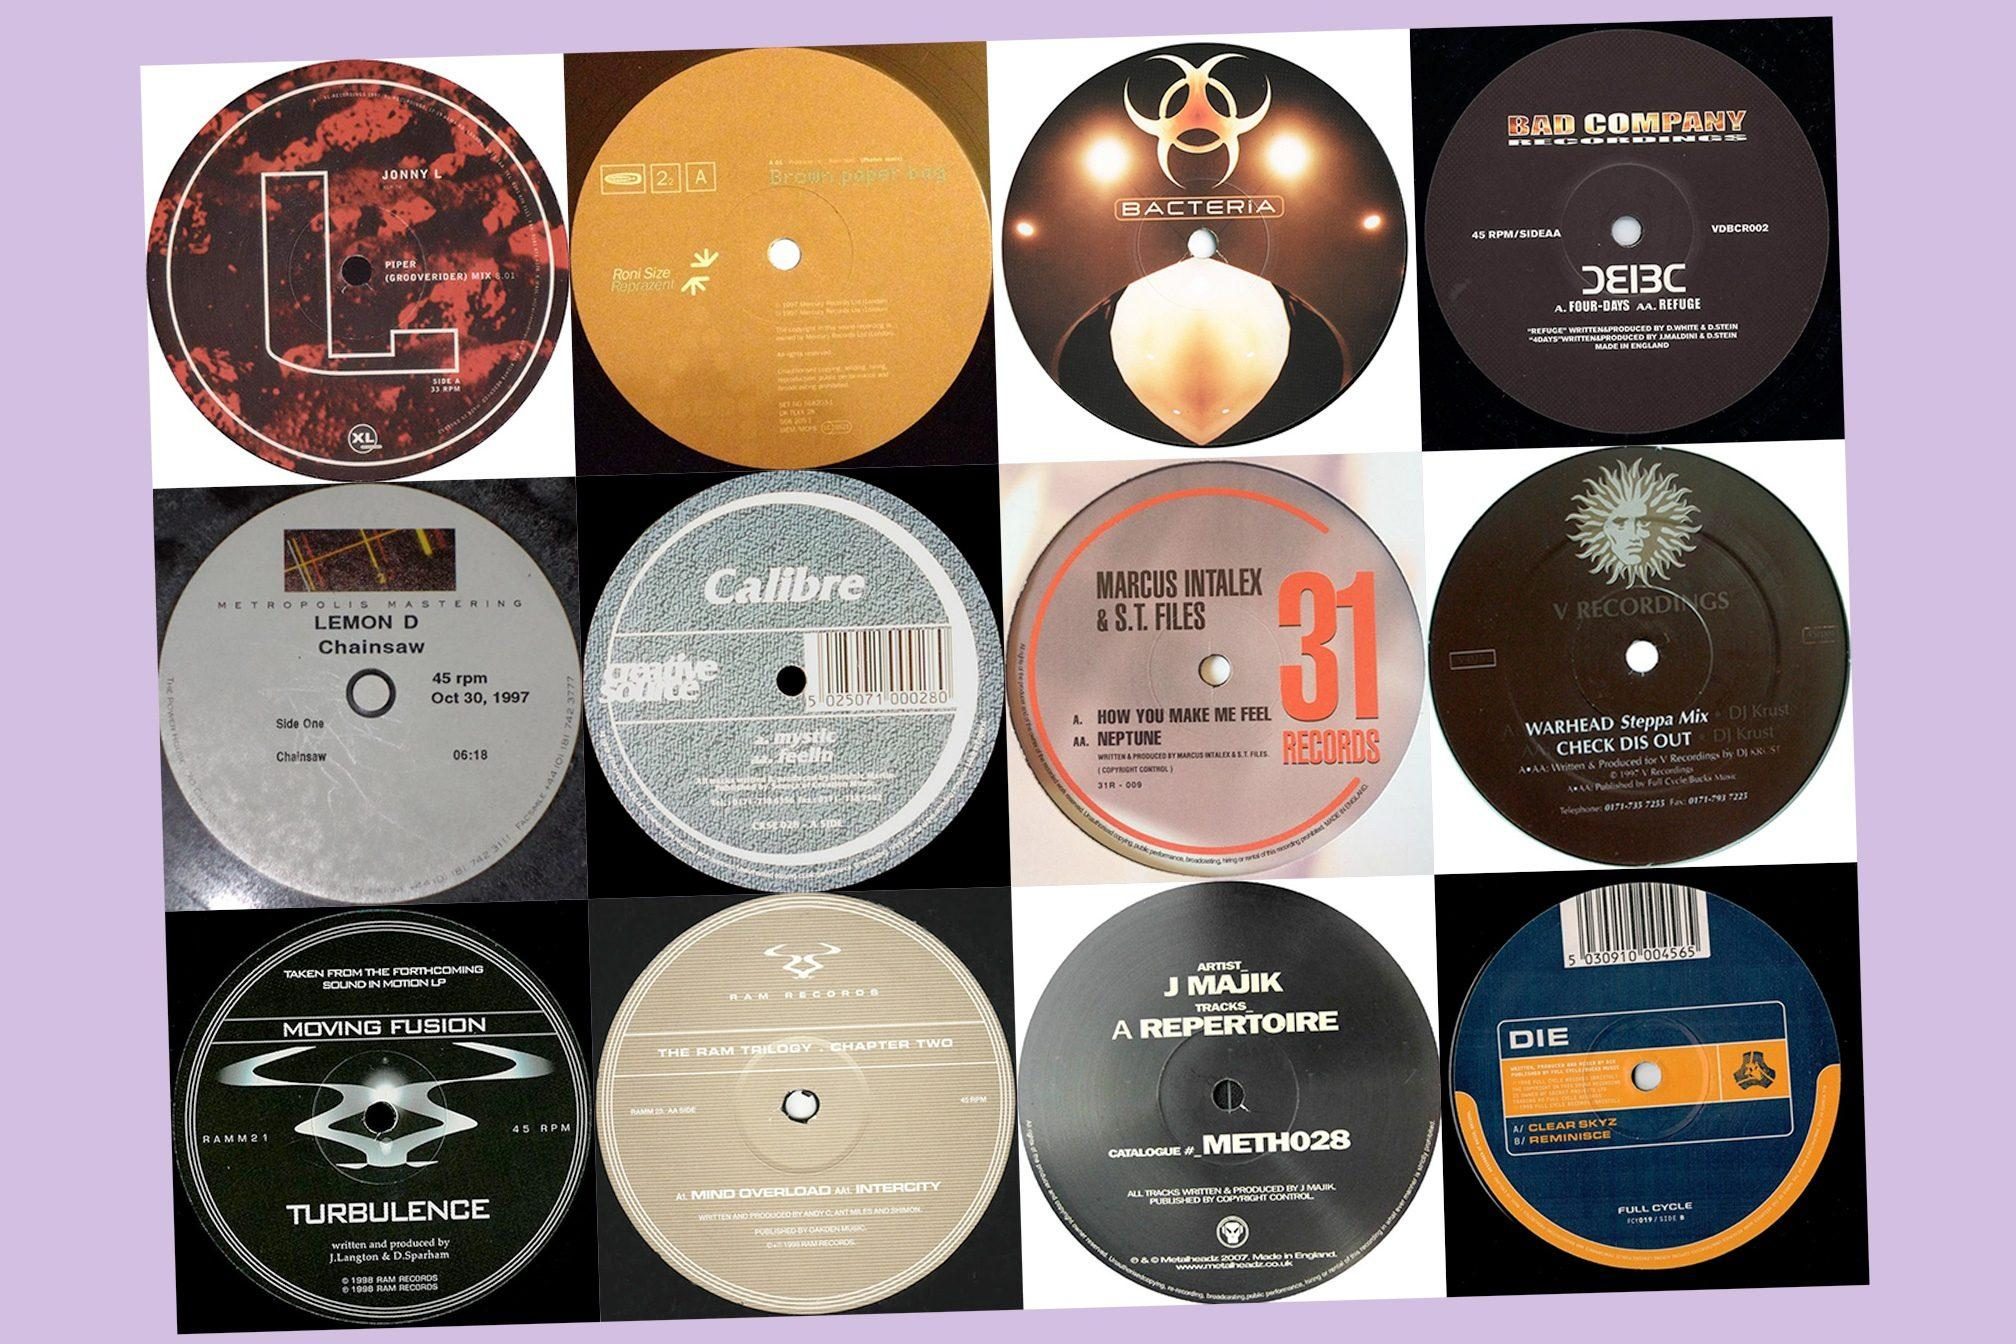 Past, present and future Drum’ n’ Bass selected by Jean Paul Sabazon